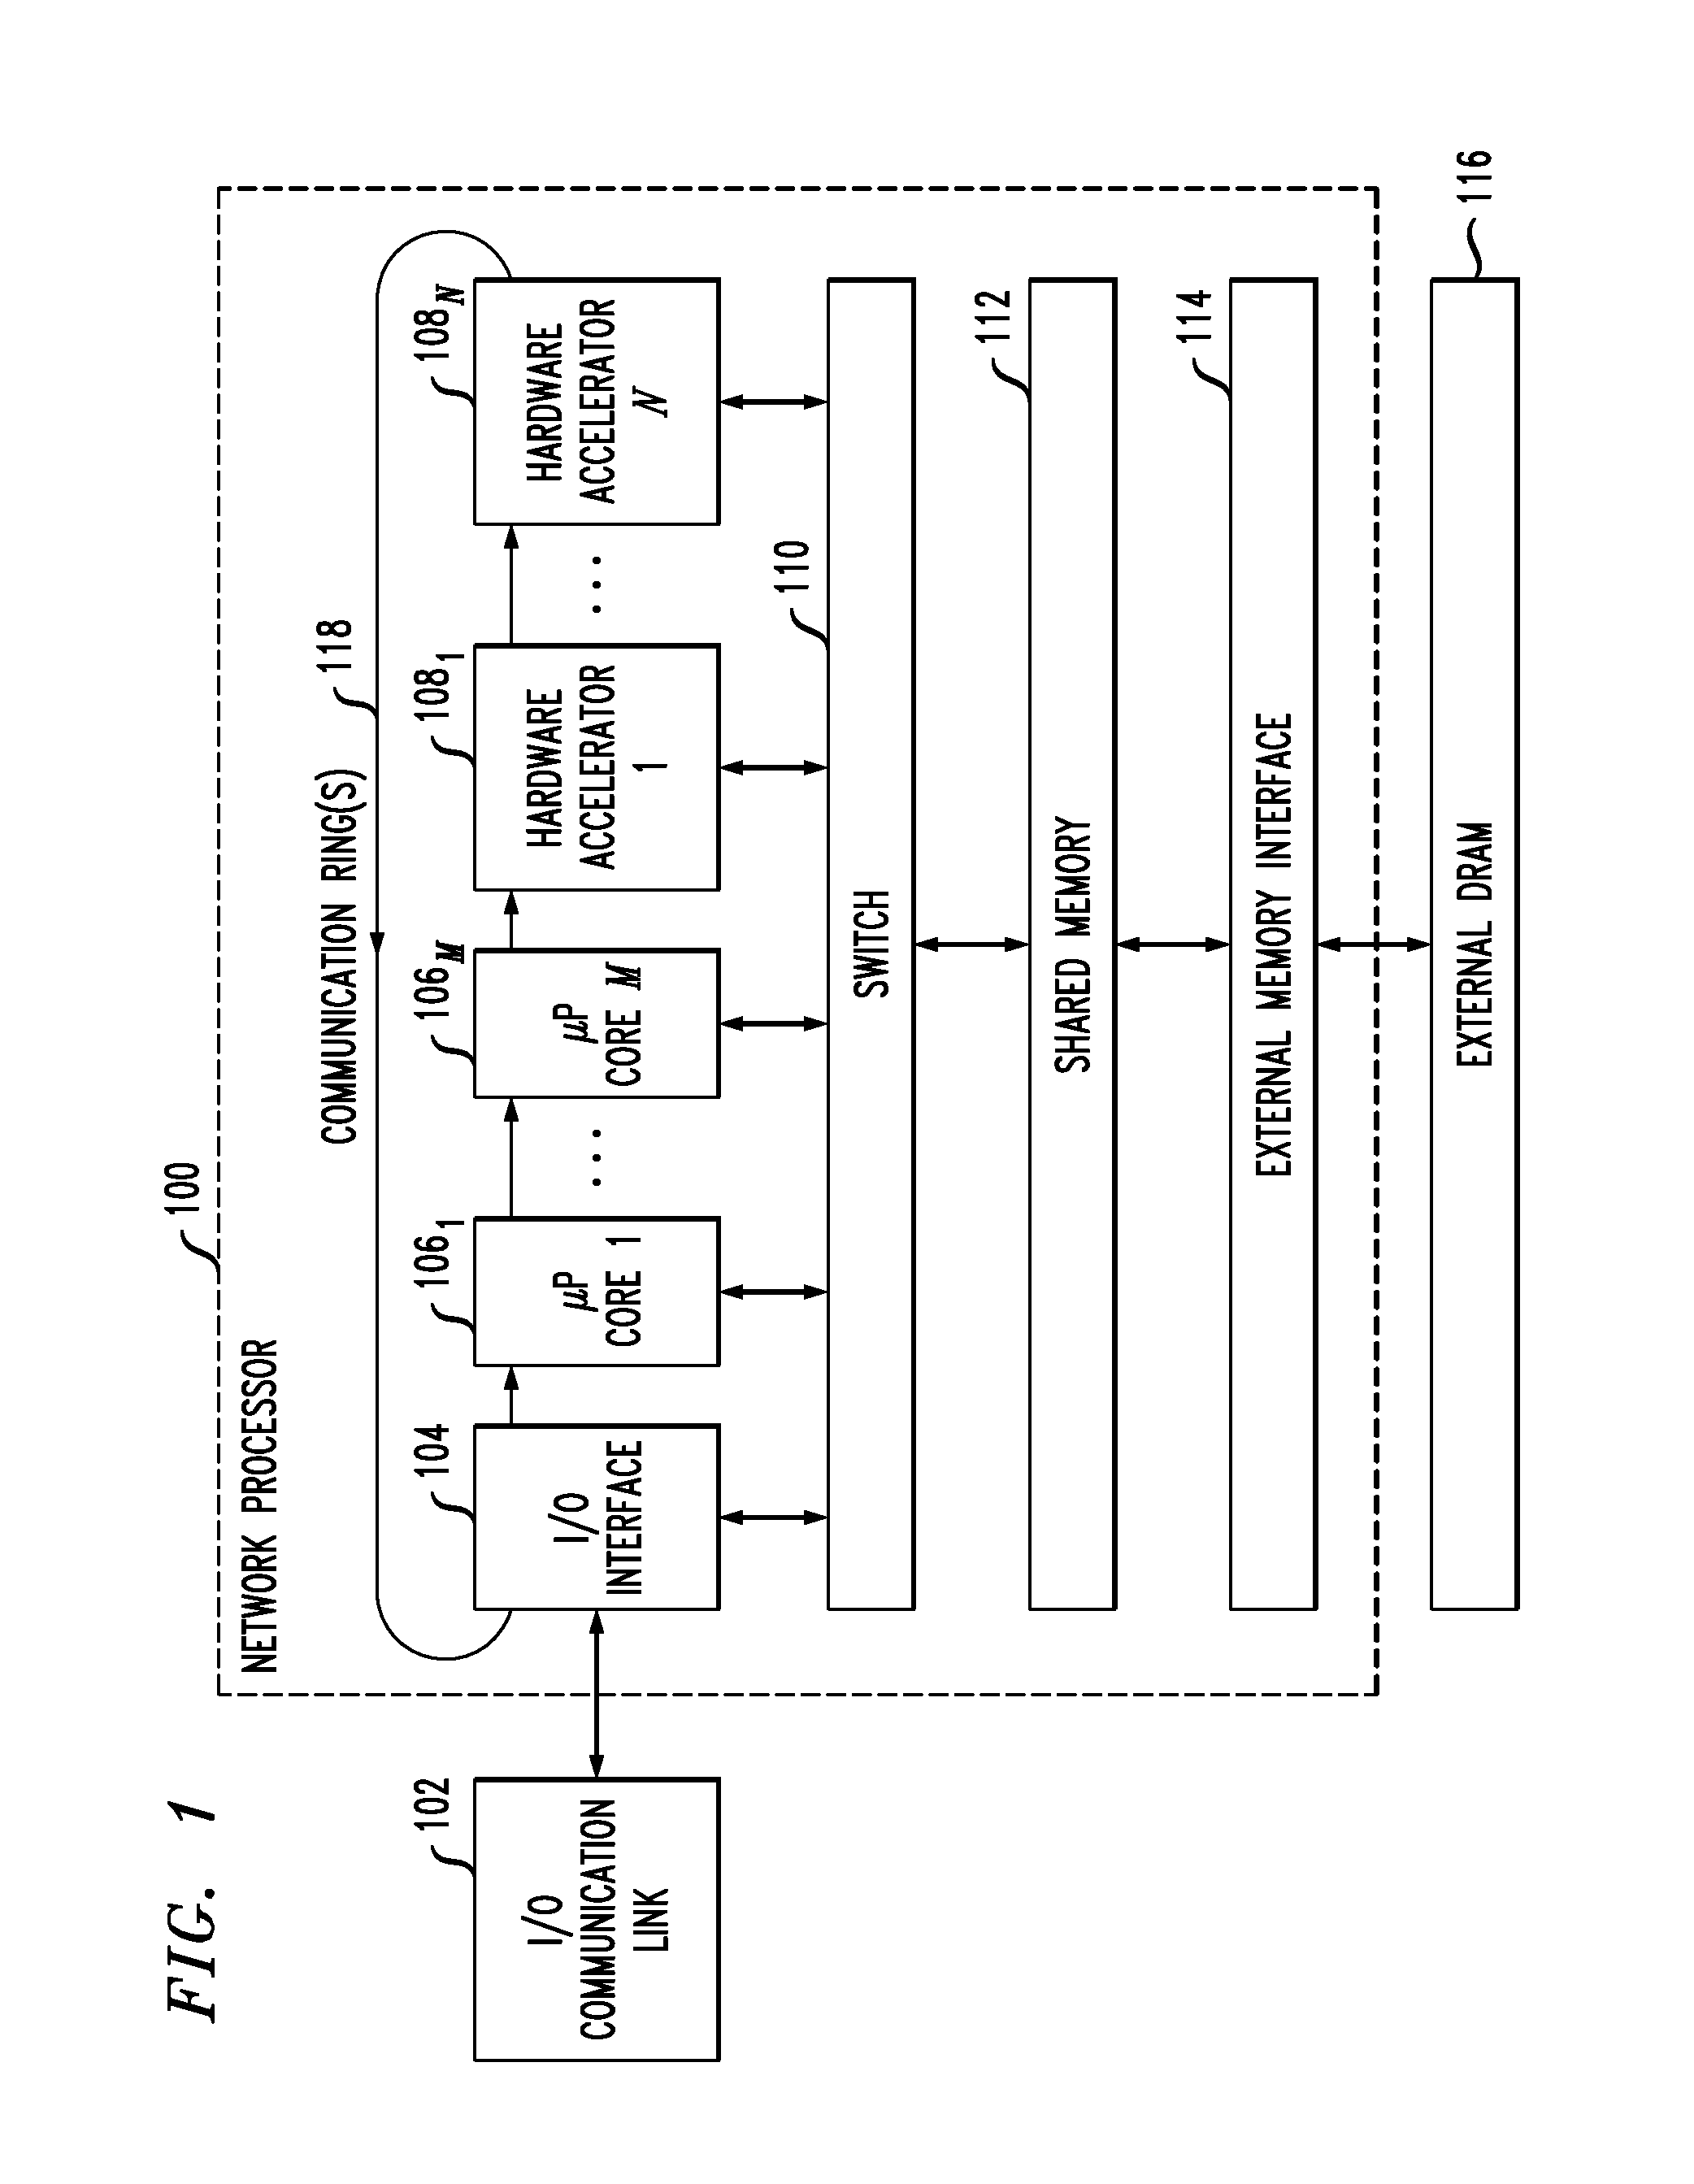 Local messaging in a scheduling hierarchy in a traffic manager of a network processor